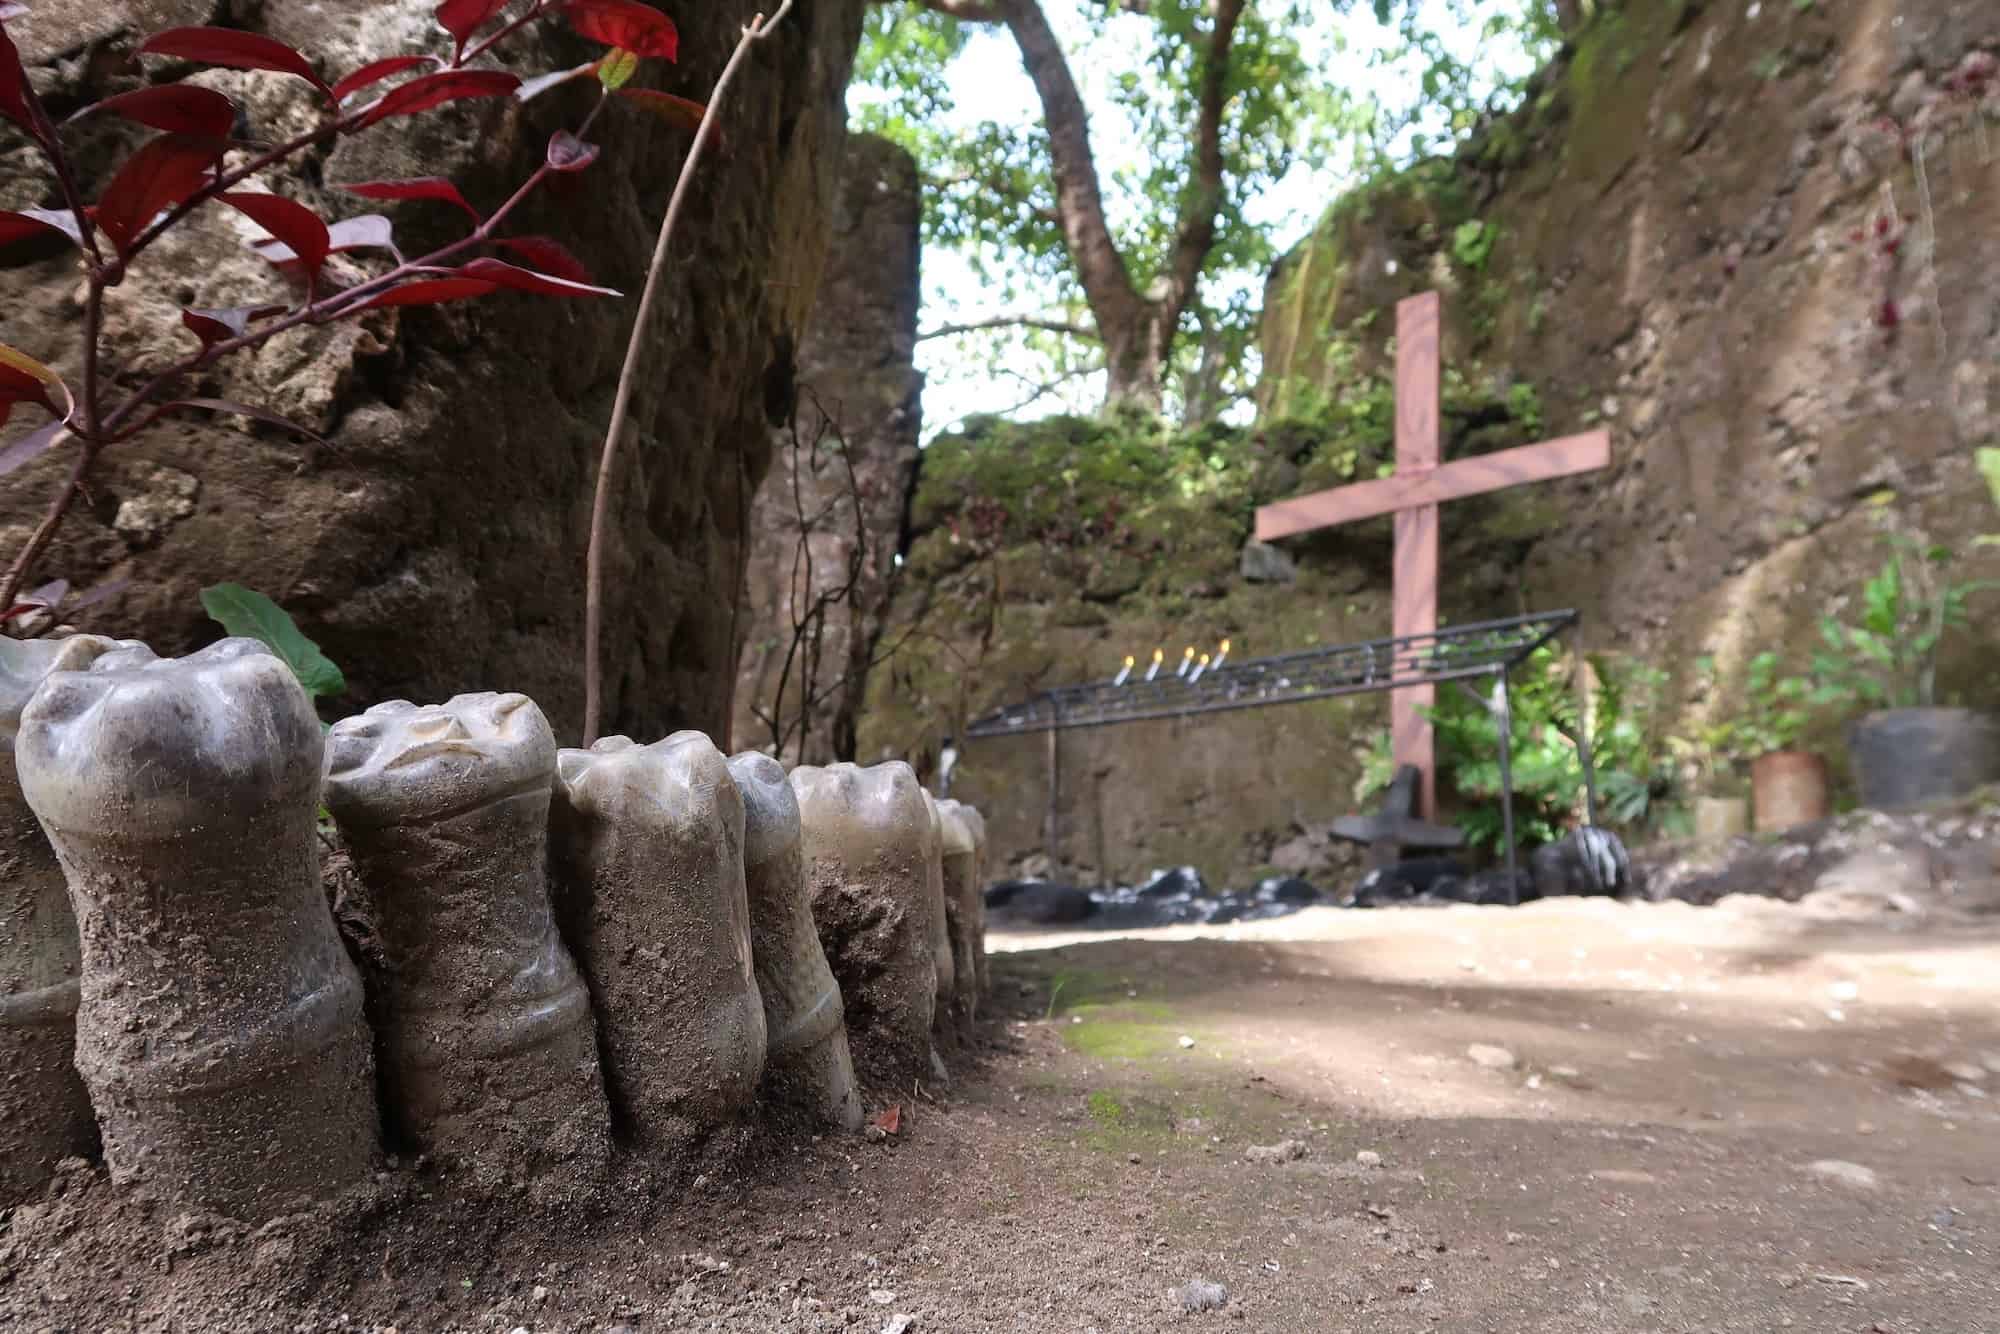 Camiguin’s Guiob Church Ruins and Volcanic Sunken Cemetery